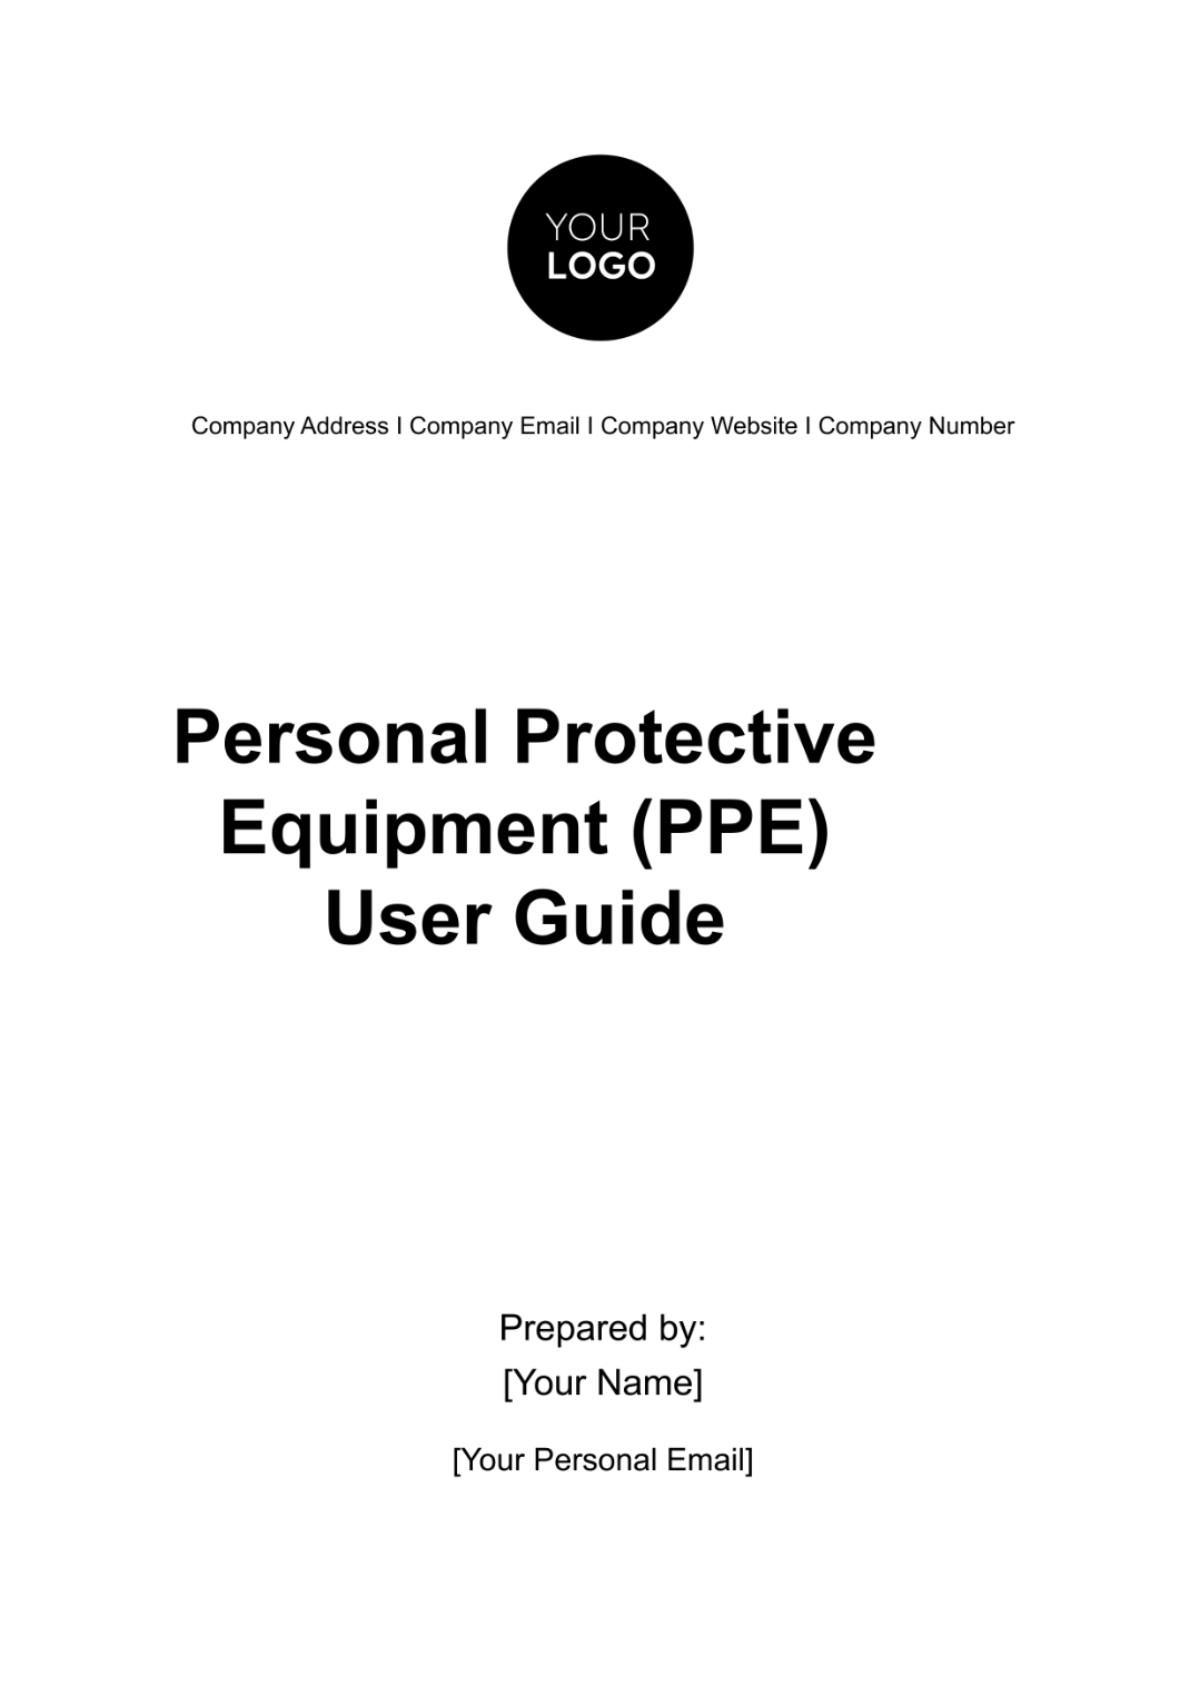 Personal Protective Equipment (PPE) User Guide HR Template